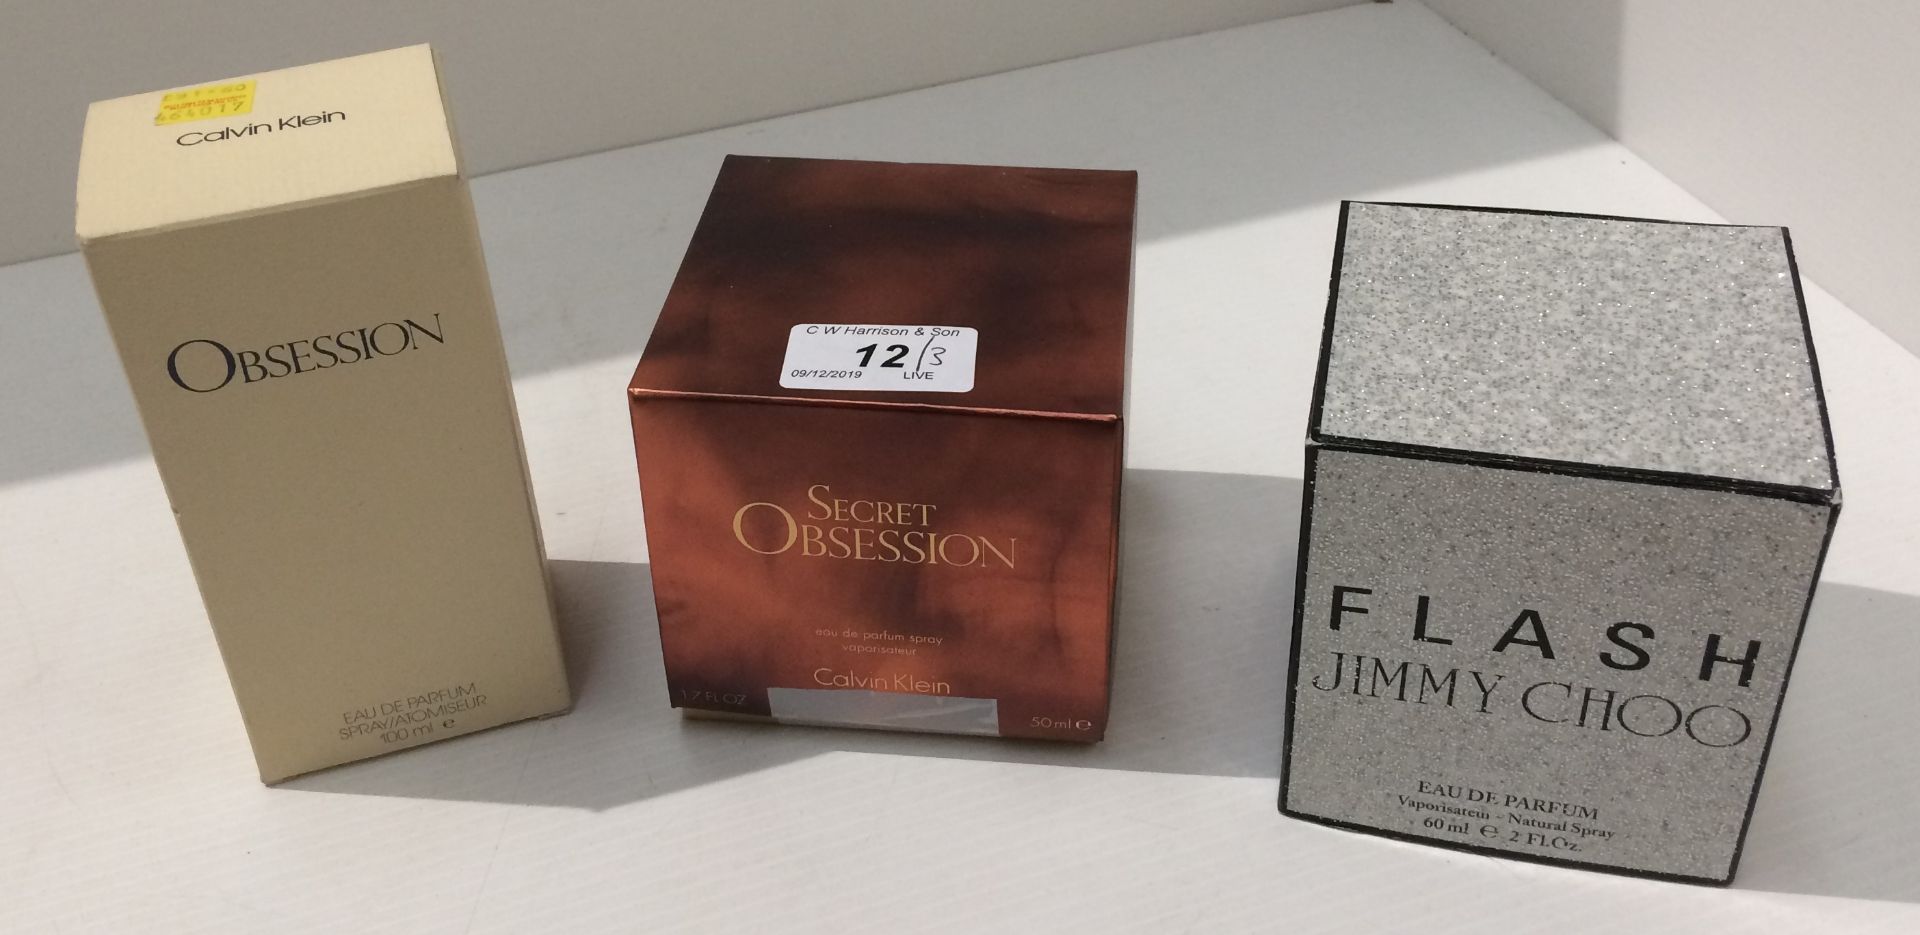 3 x nearly full boxed bottles of Perfume - Calvin Klein Obsession,